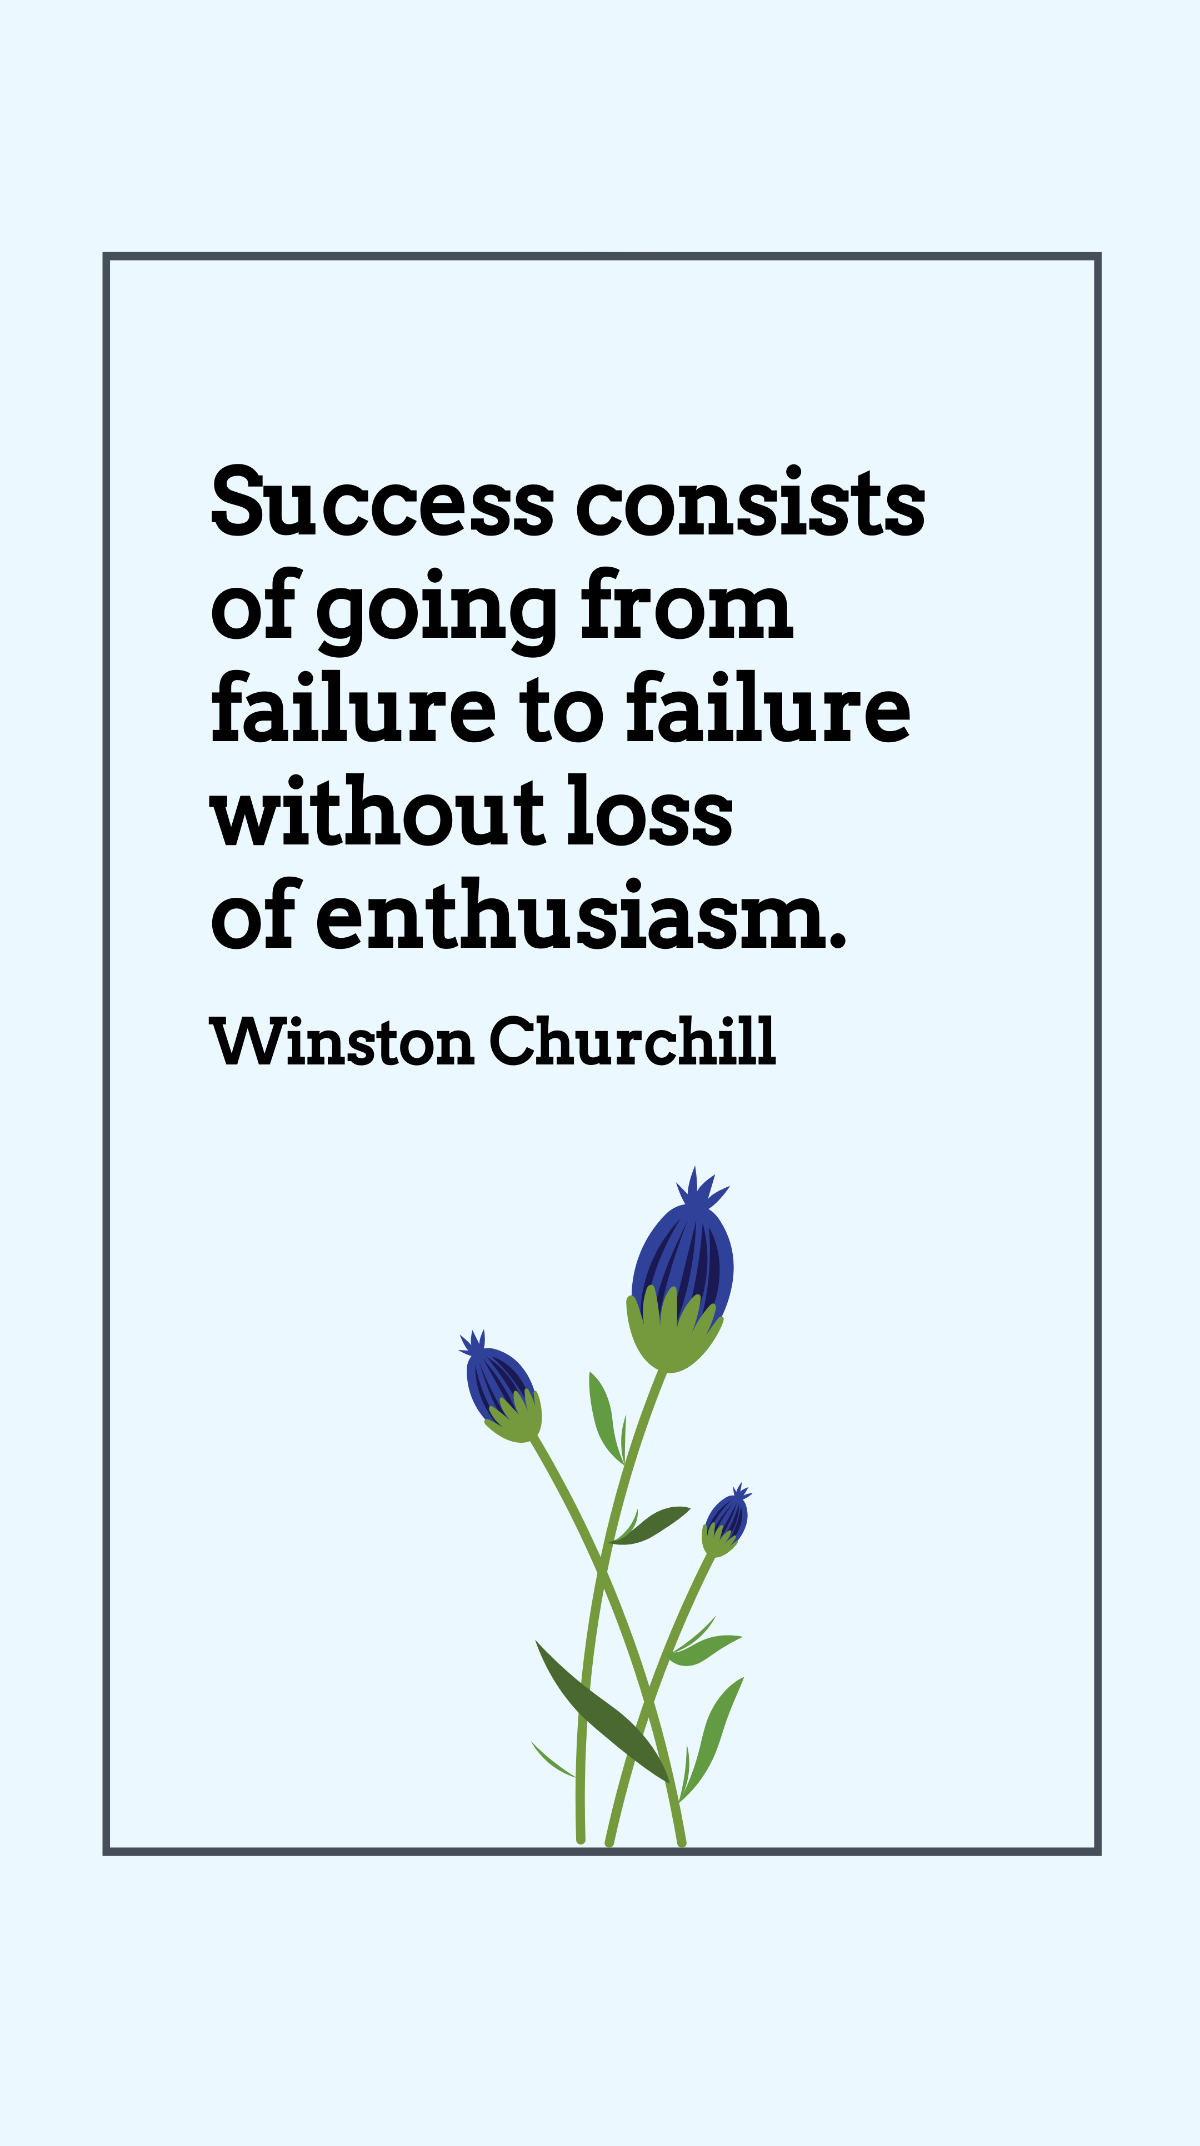 Free Winston Churchill - Success consists of going from failure to failure without loss of enthusiasm. Template